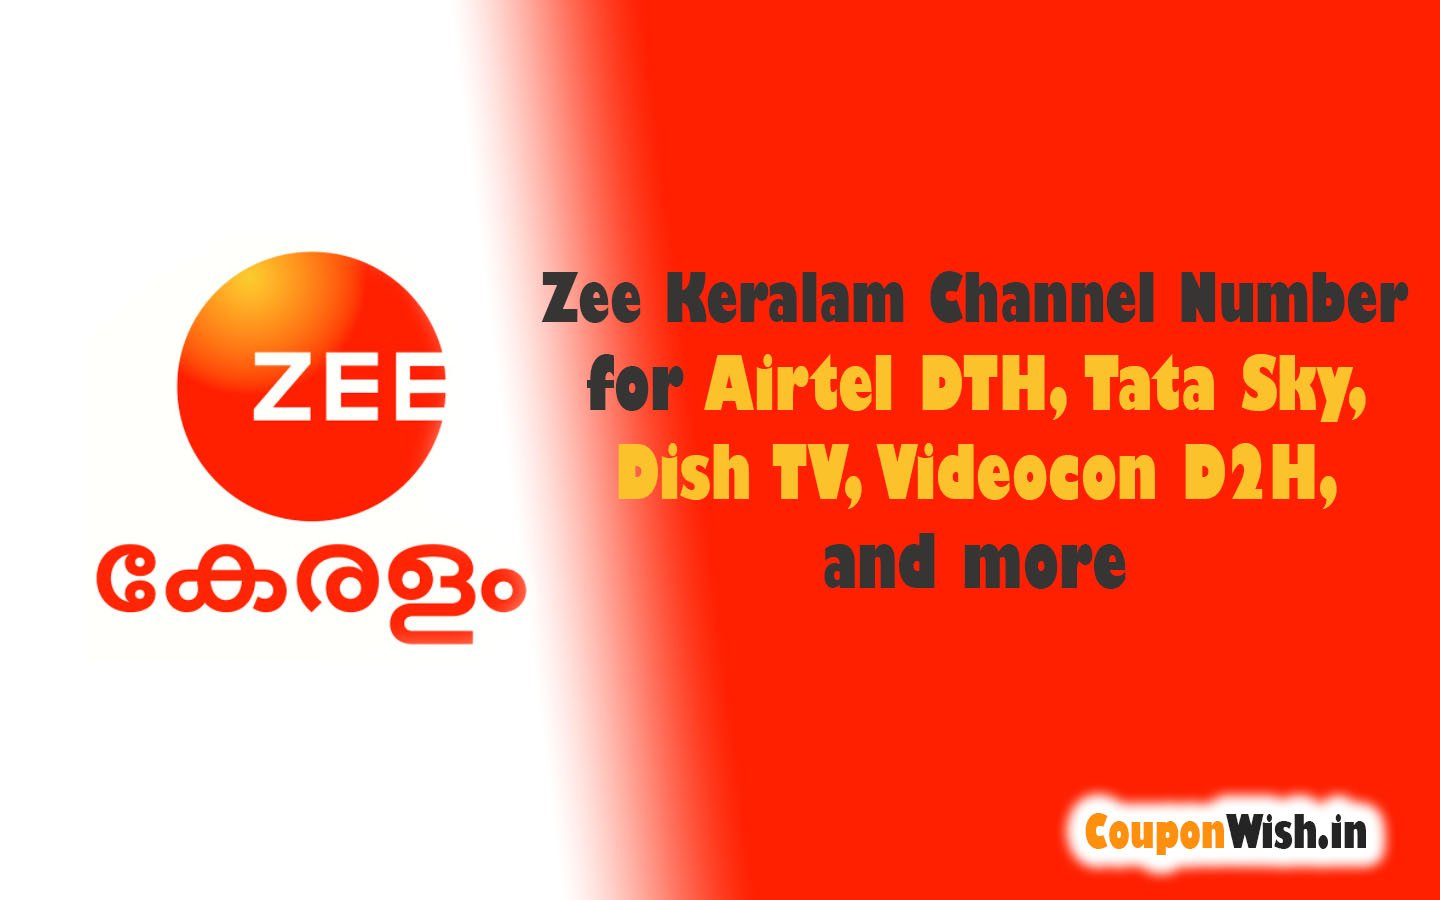 Zee Keralam Channel Number for Airtel DTH, Tata Sky, Dish TV, Videocon D2H, and more